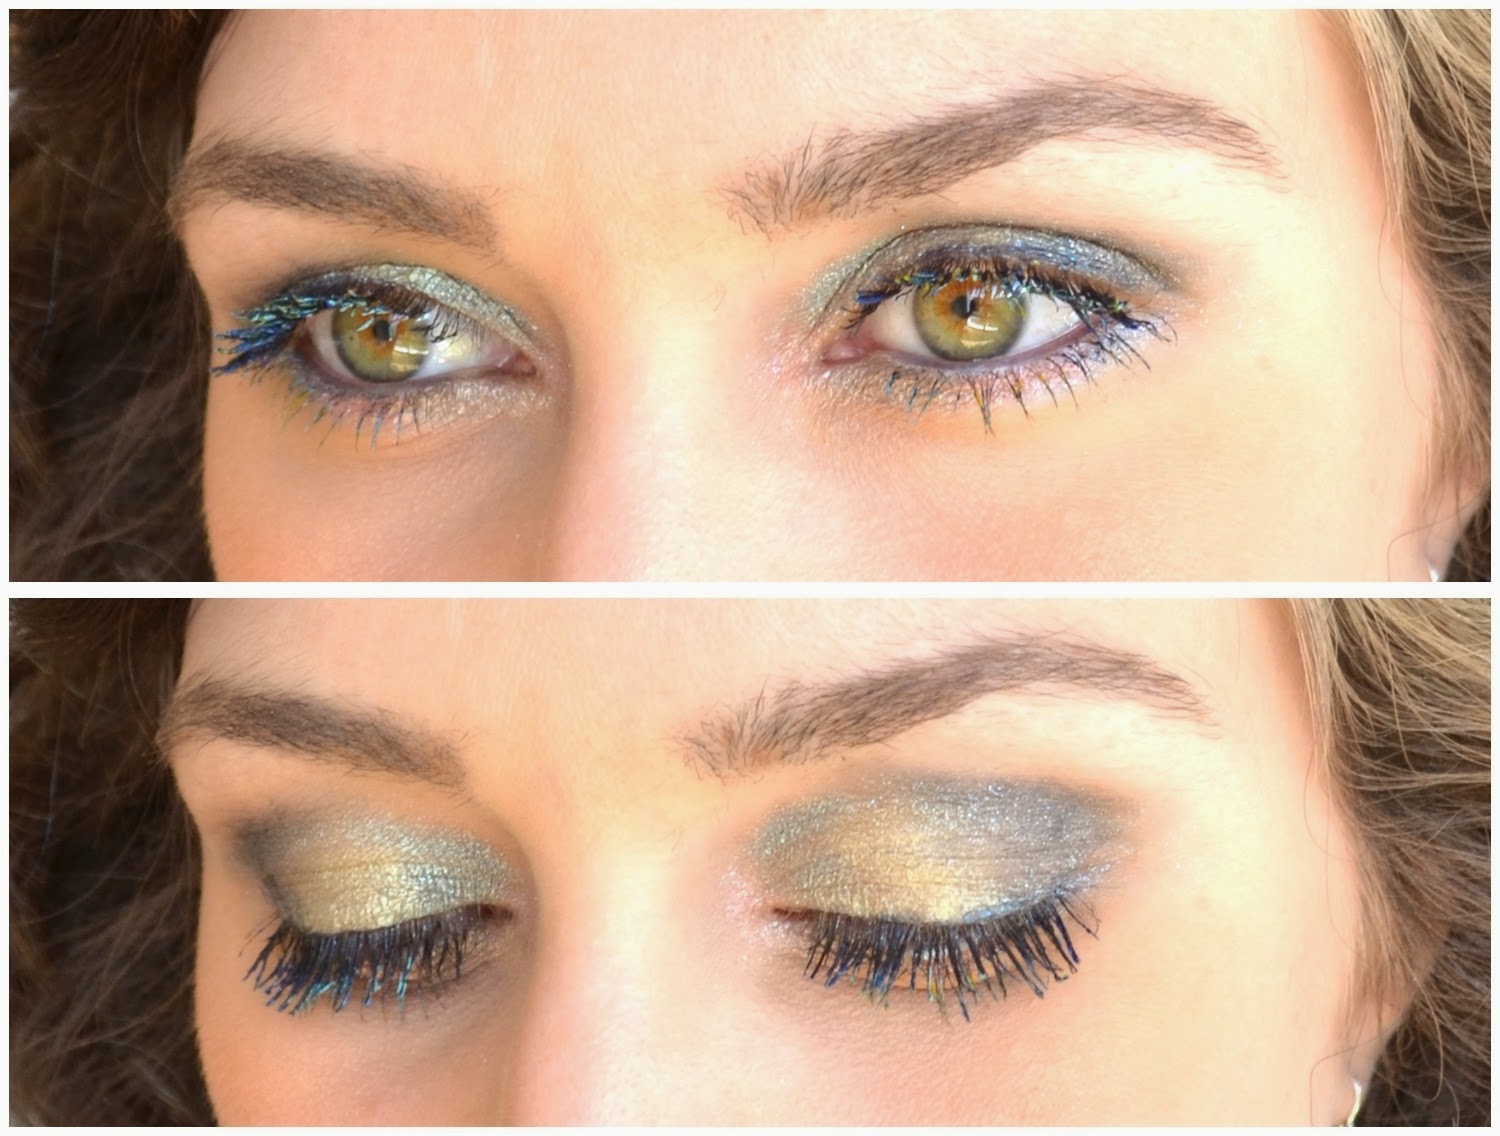 Caught in Action: Chanel Stylo Fresh Effect Eyeshadows from L'été Papillon  de Chanel